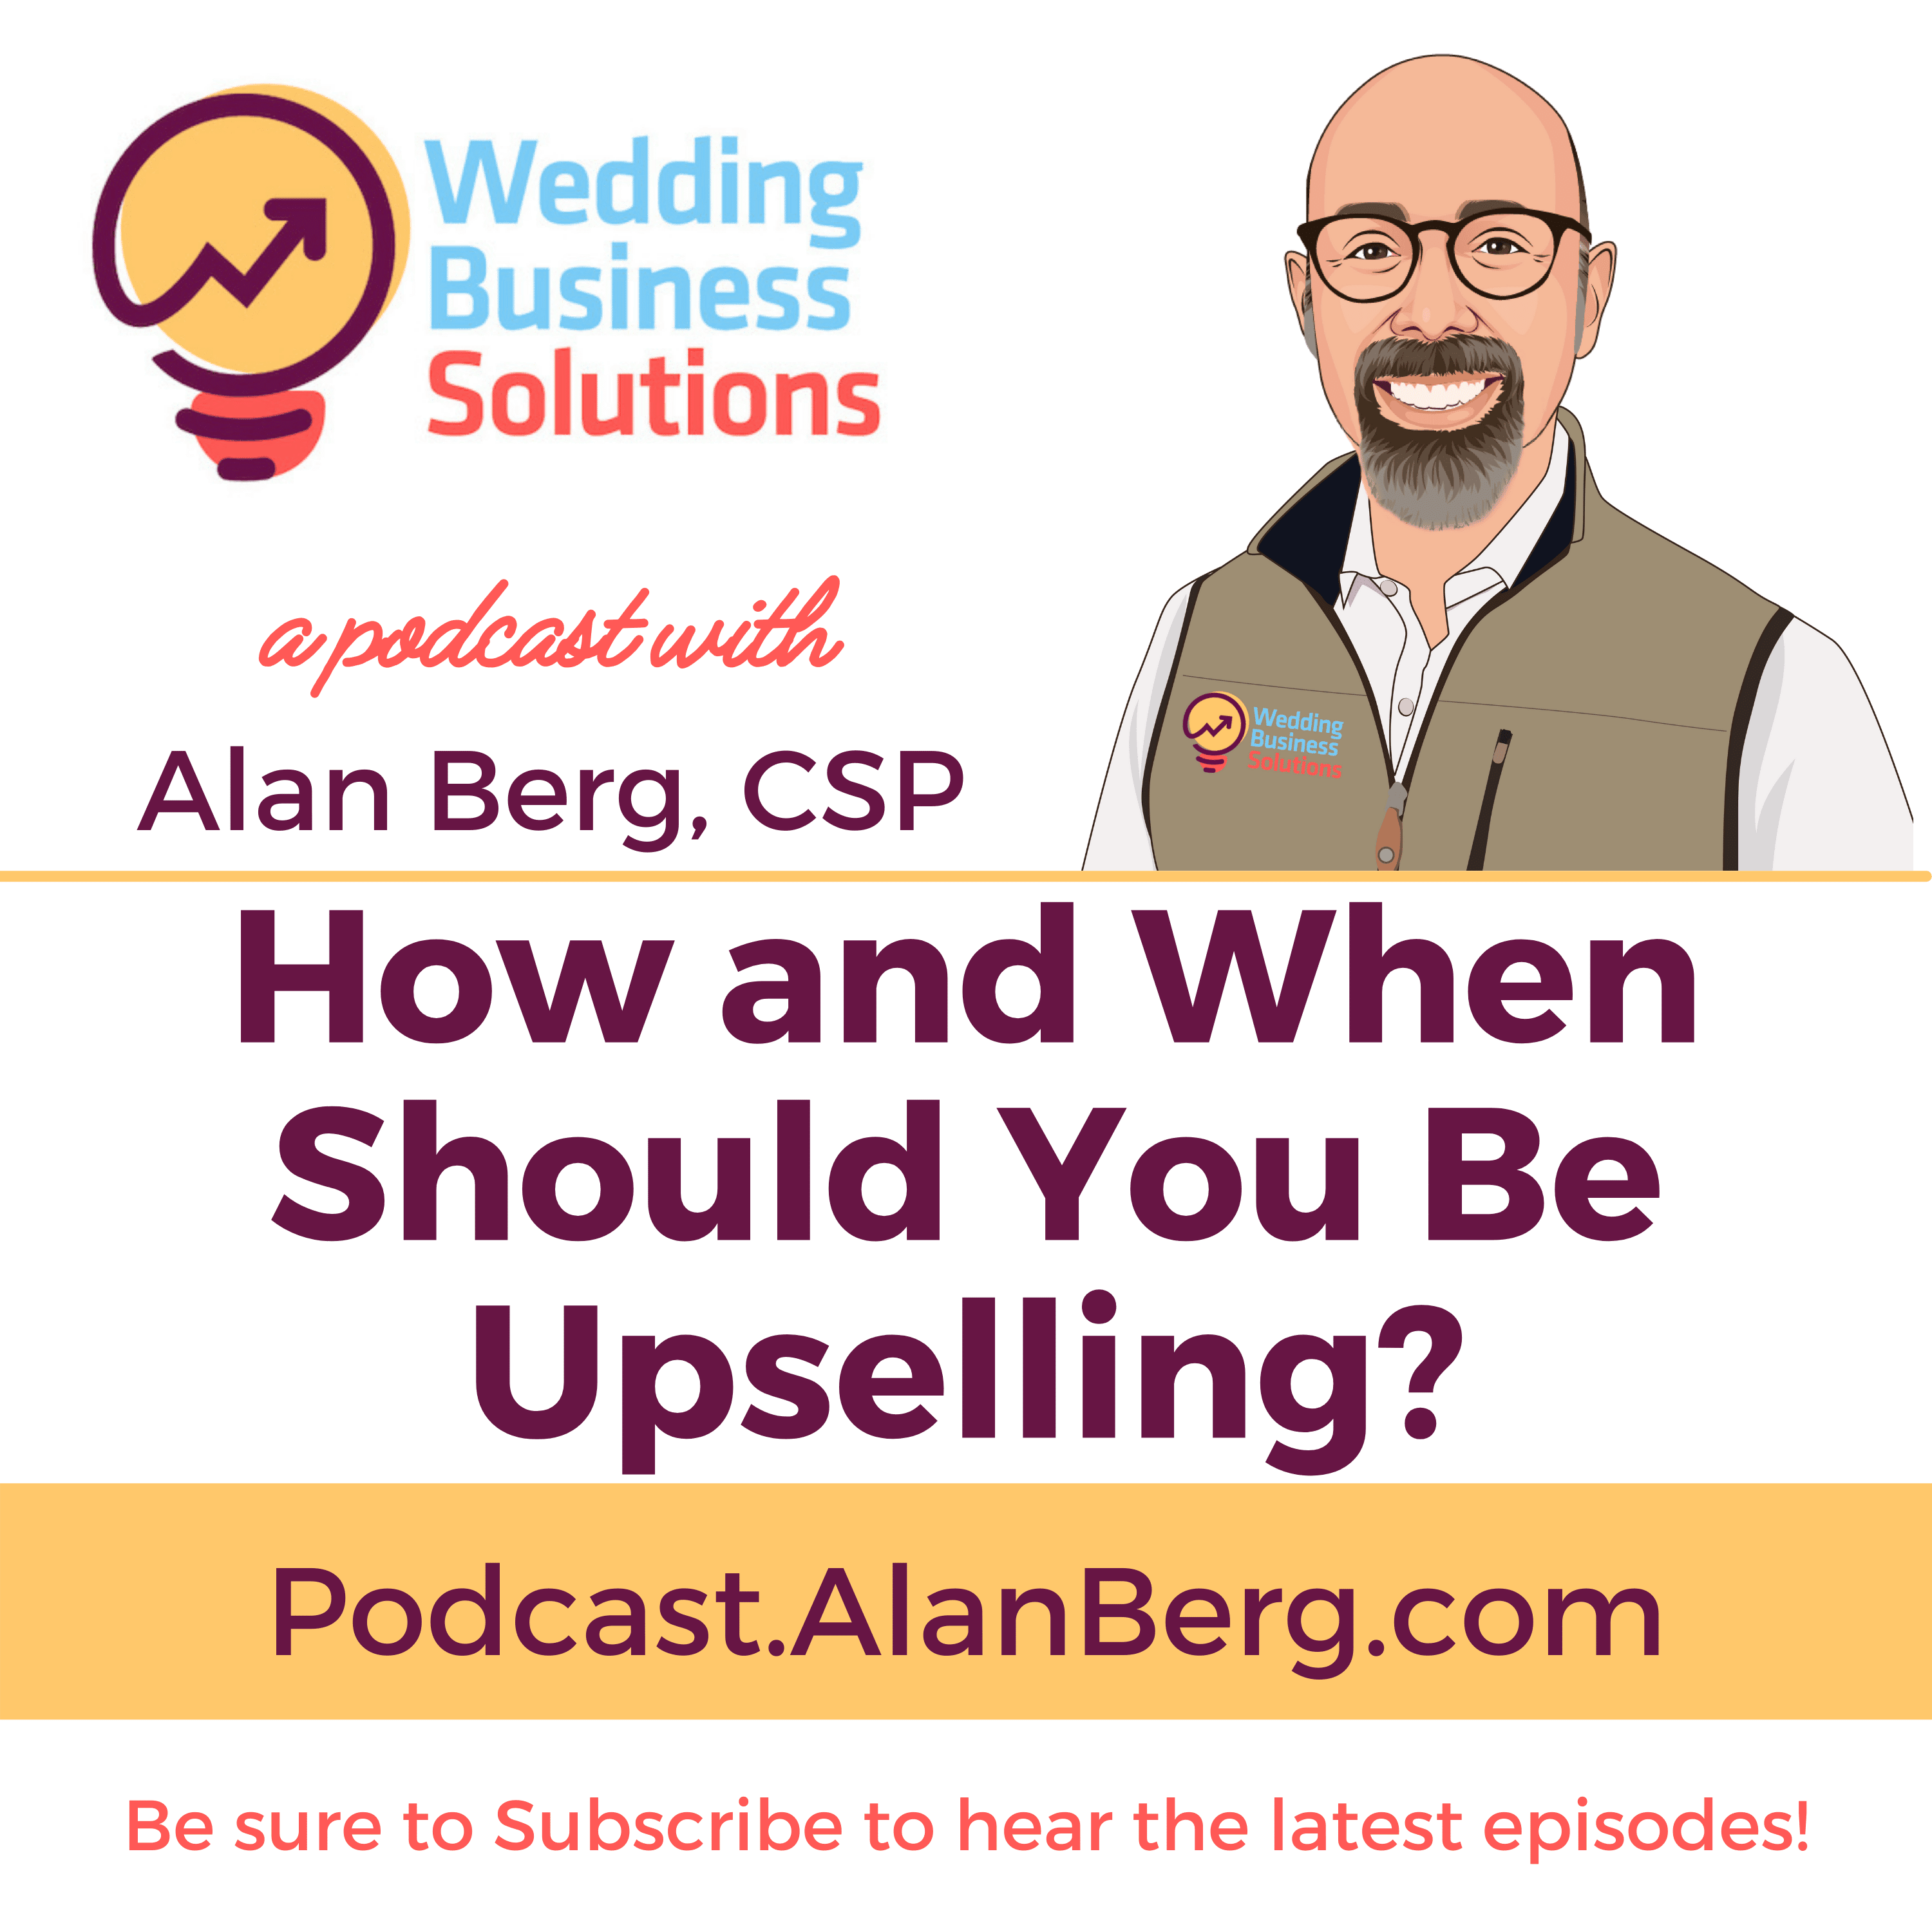 How and When Should You Be Upselling - Alan Berg CSP, Wedding Business Solutions Podcast